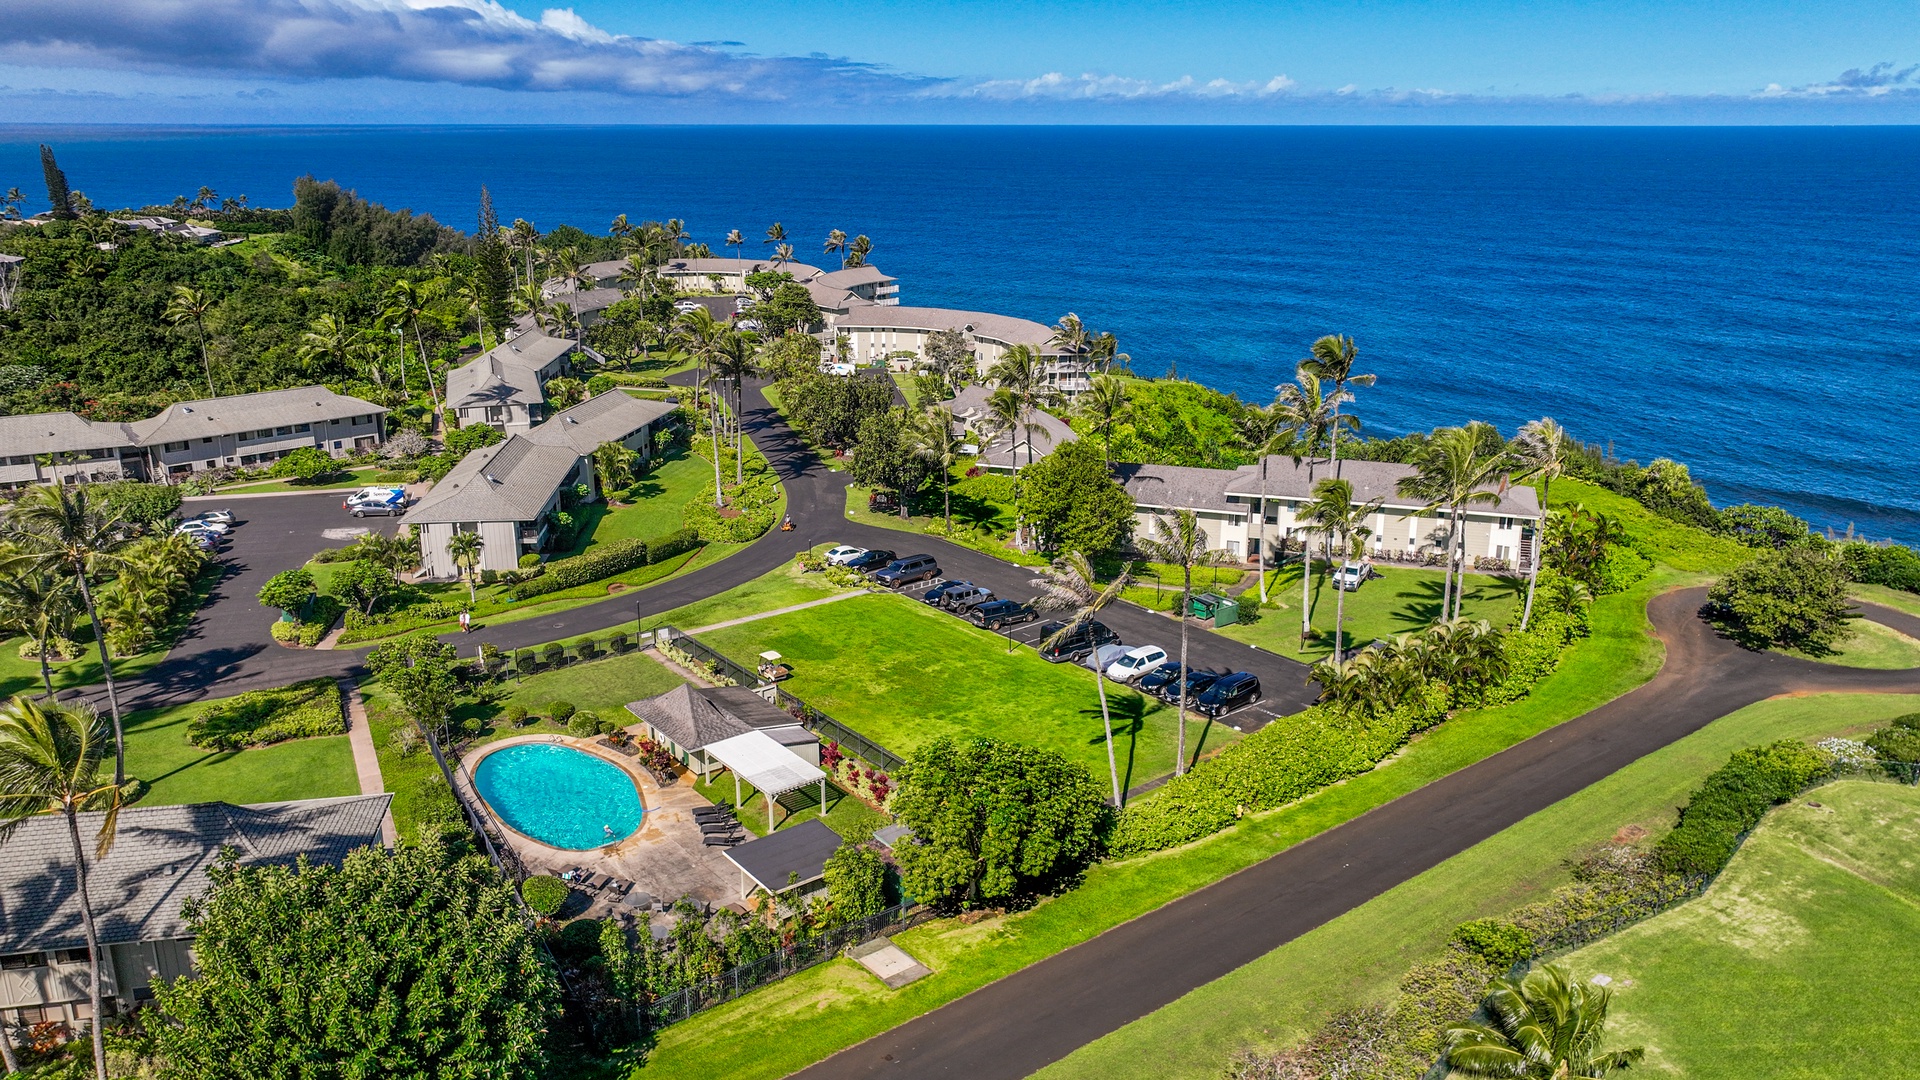 Princeville Vacation Rentals, Alii Kai 7201 - Aerial of the community.